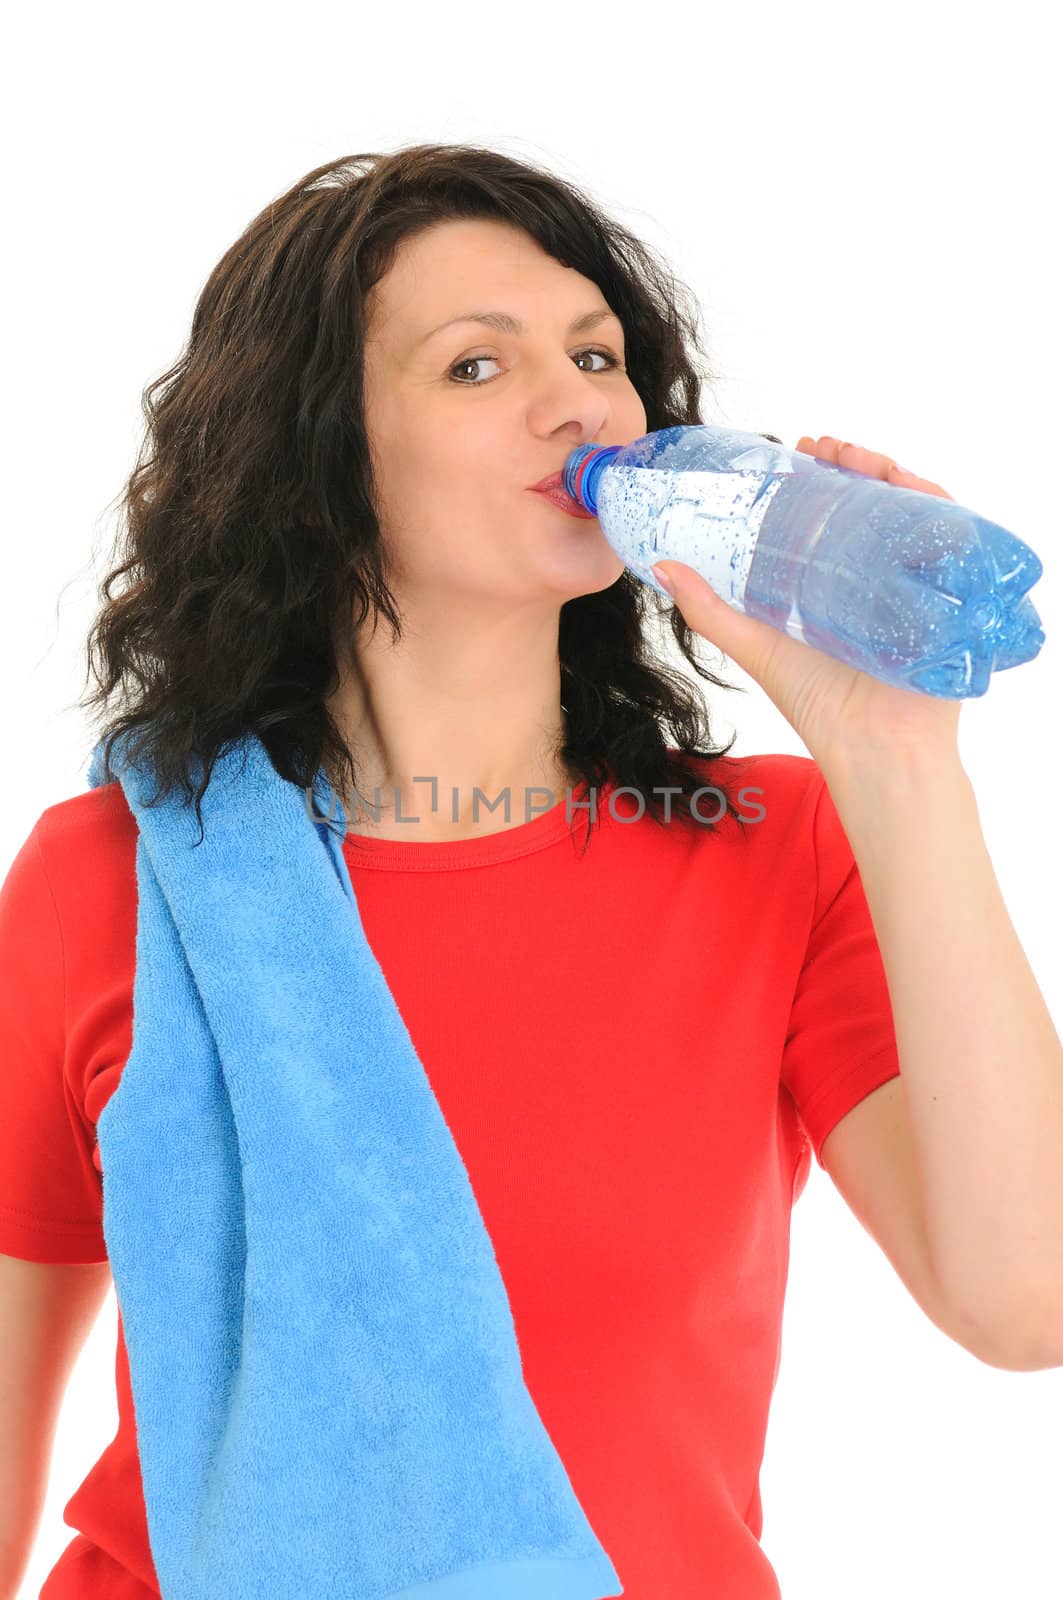 The woman with a bottle of water isolated on white background